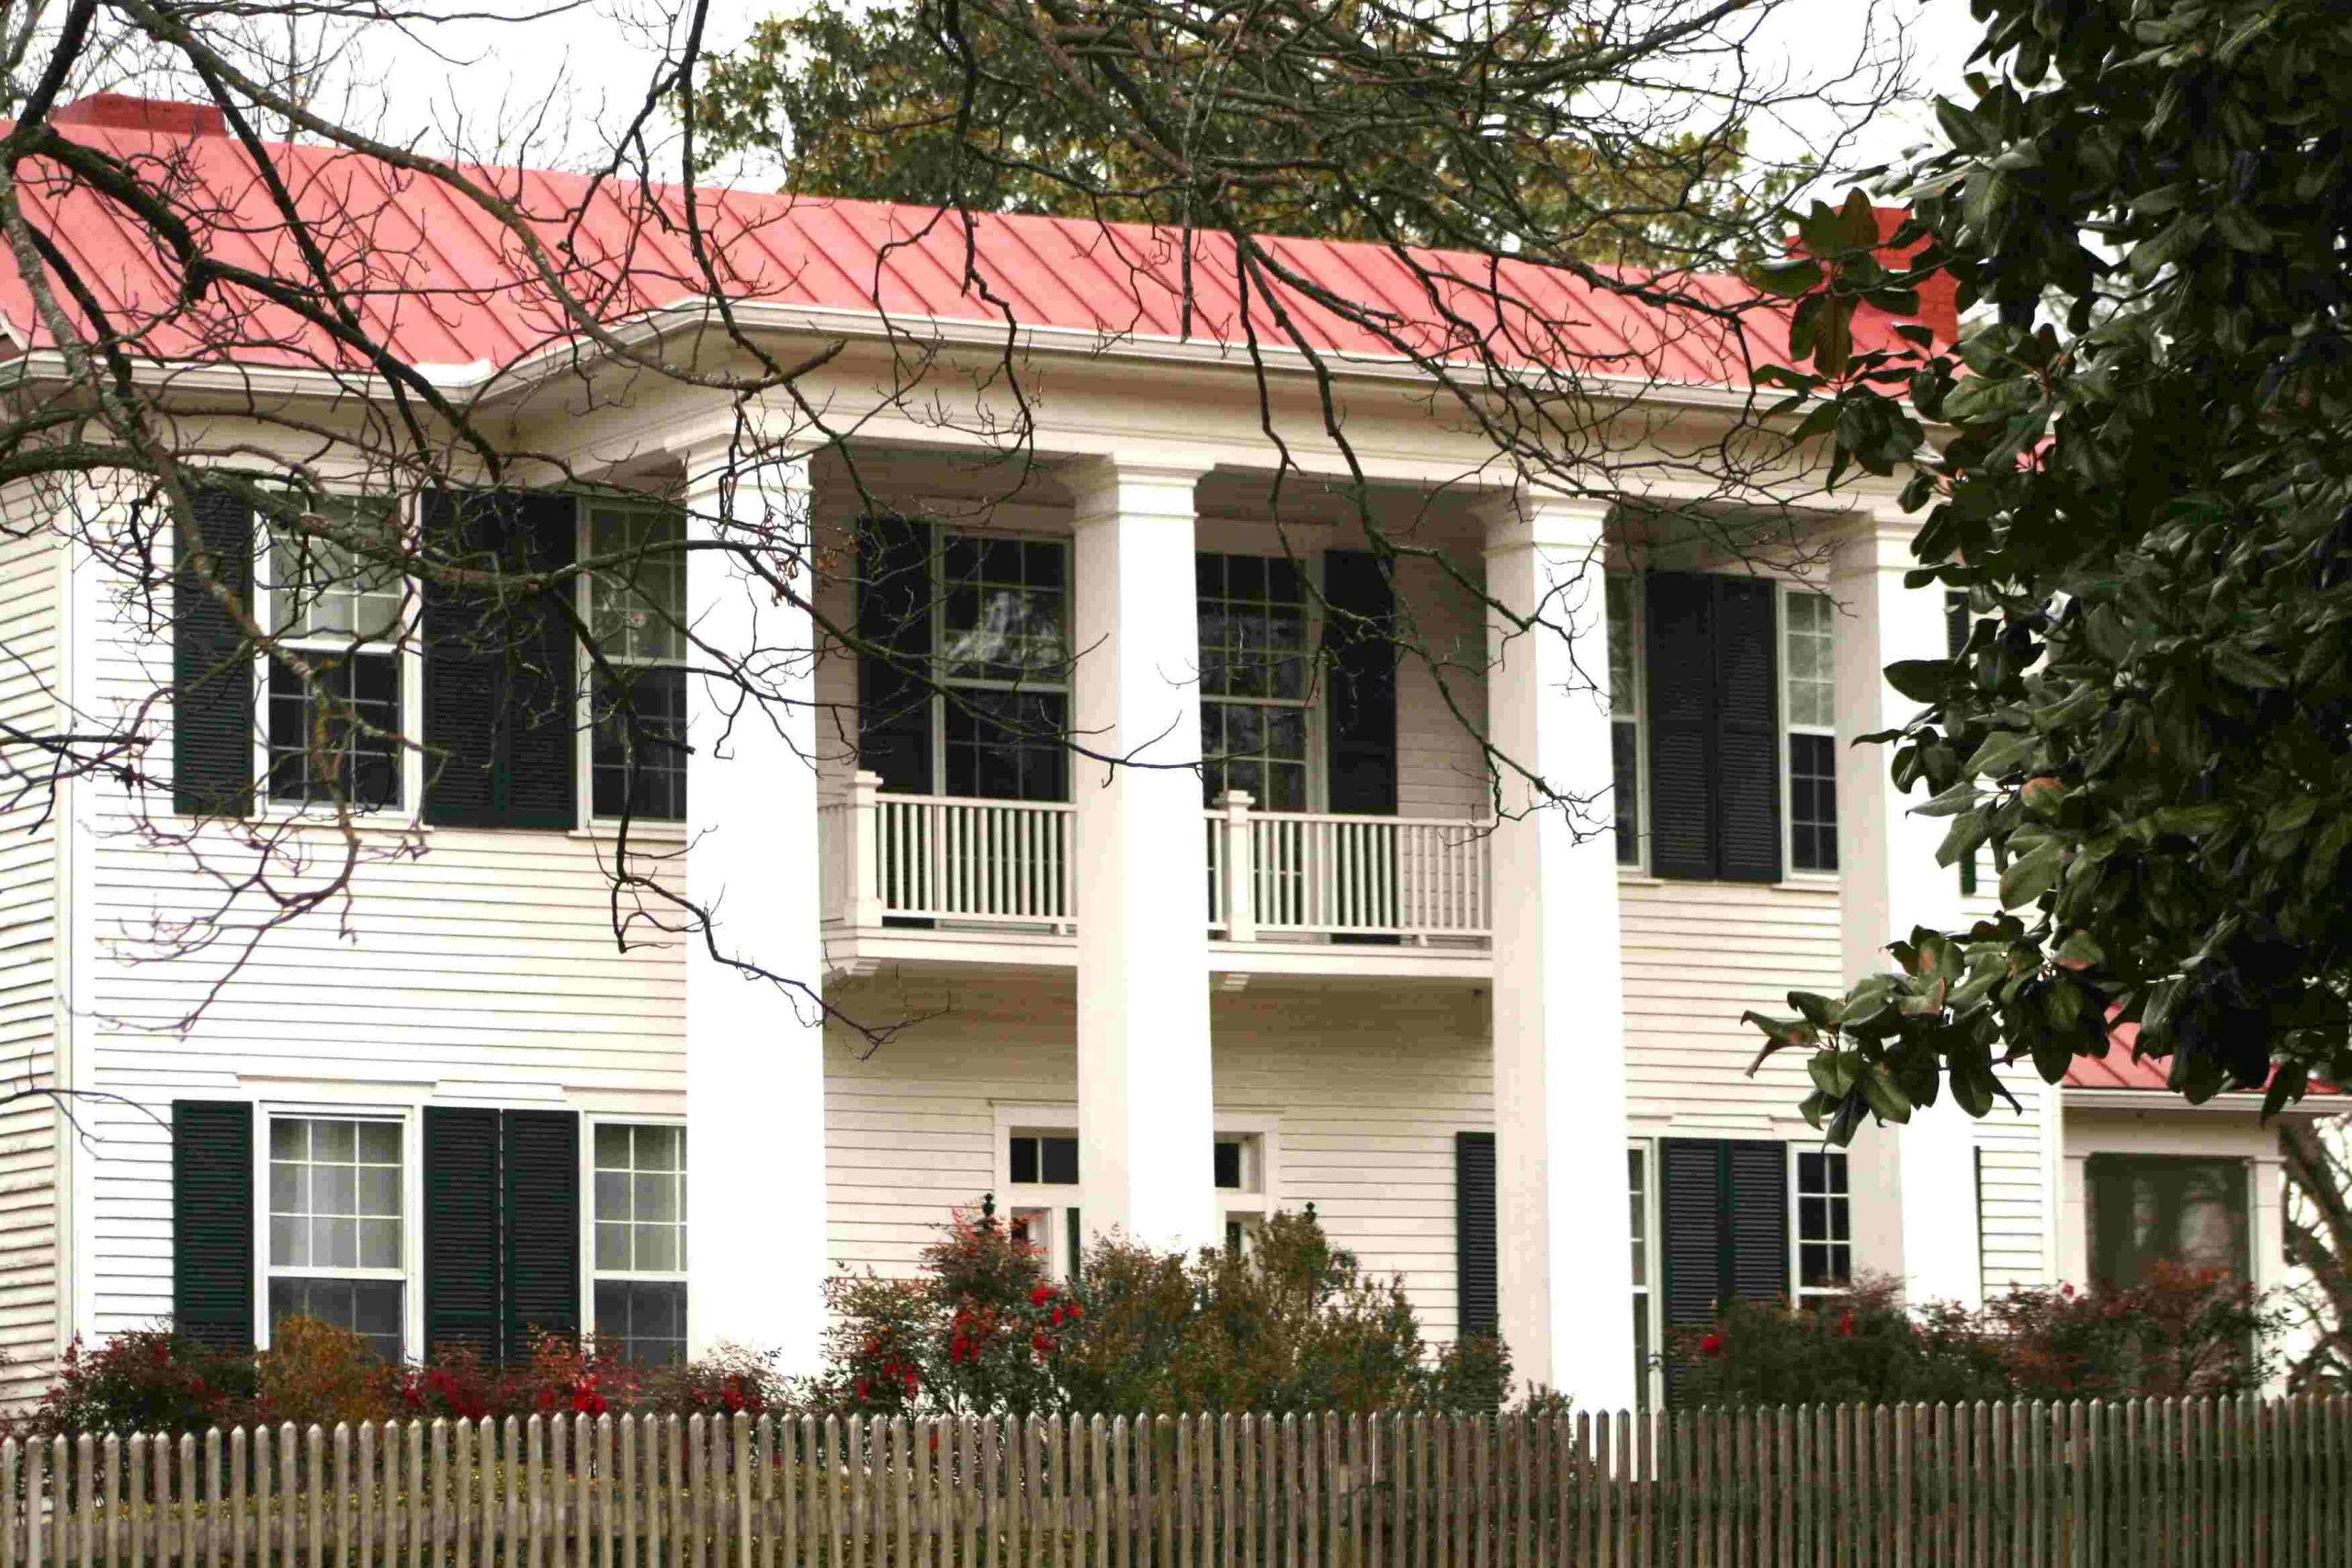 historic white home with porches and columns, red roof